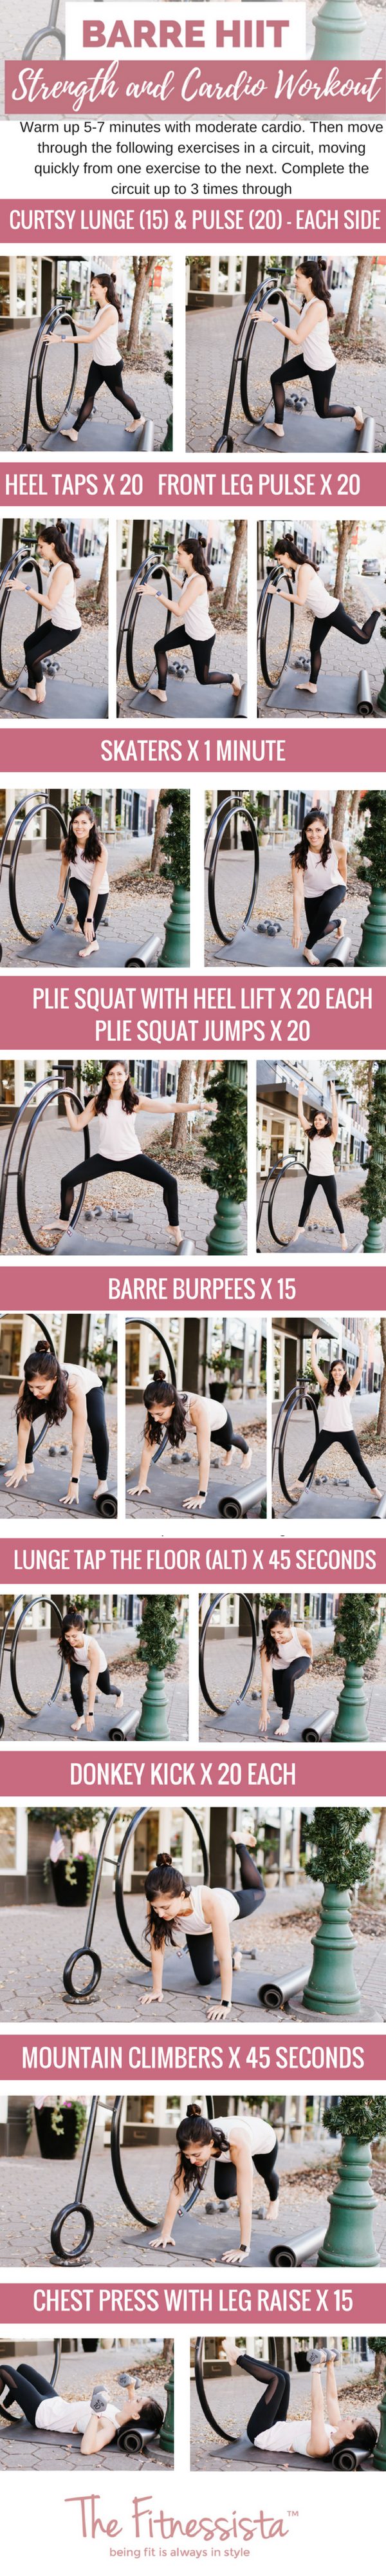 A Barre HIIT workout that combines sweaty cardio intervals with muscular endurance training. Get super lean muscles without needing to lift heavy weights! You can do this one anywhere. fitnessista.com